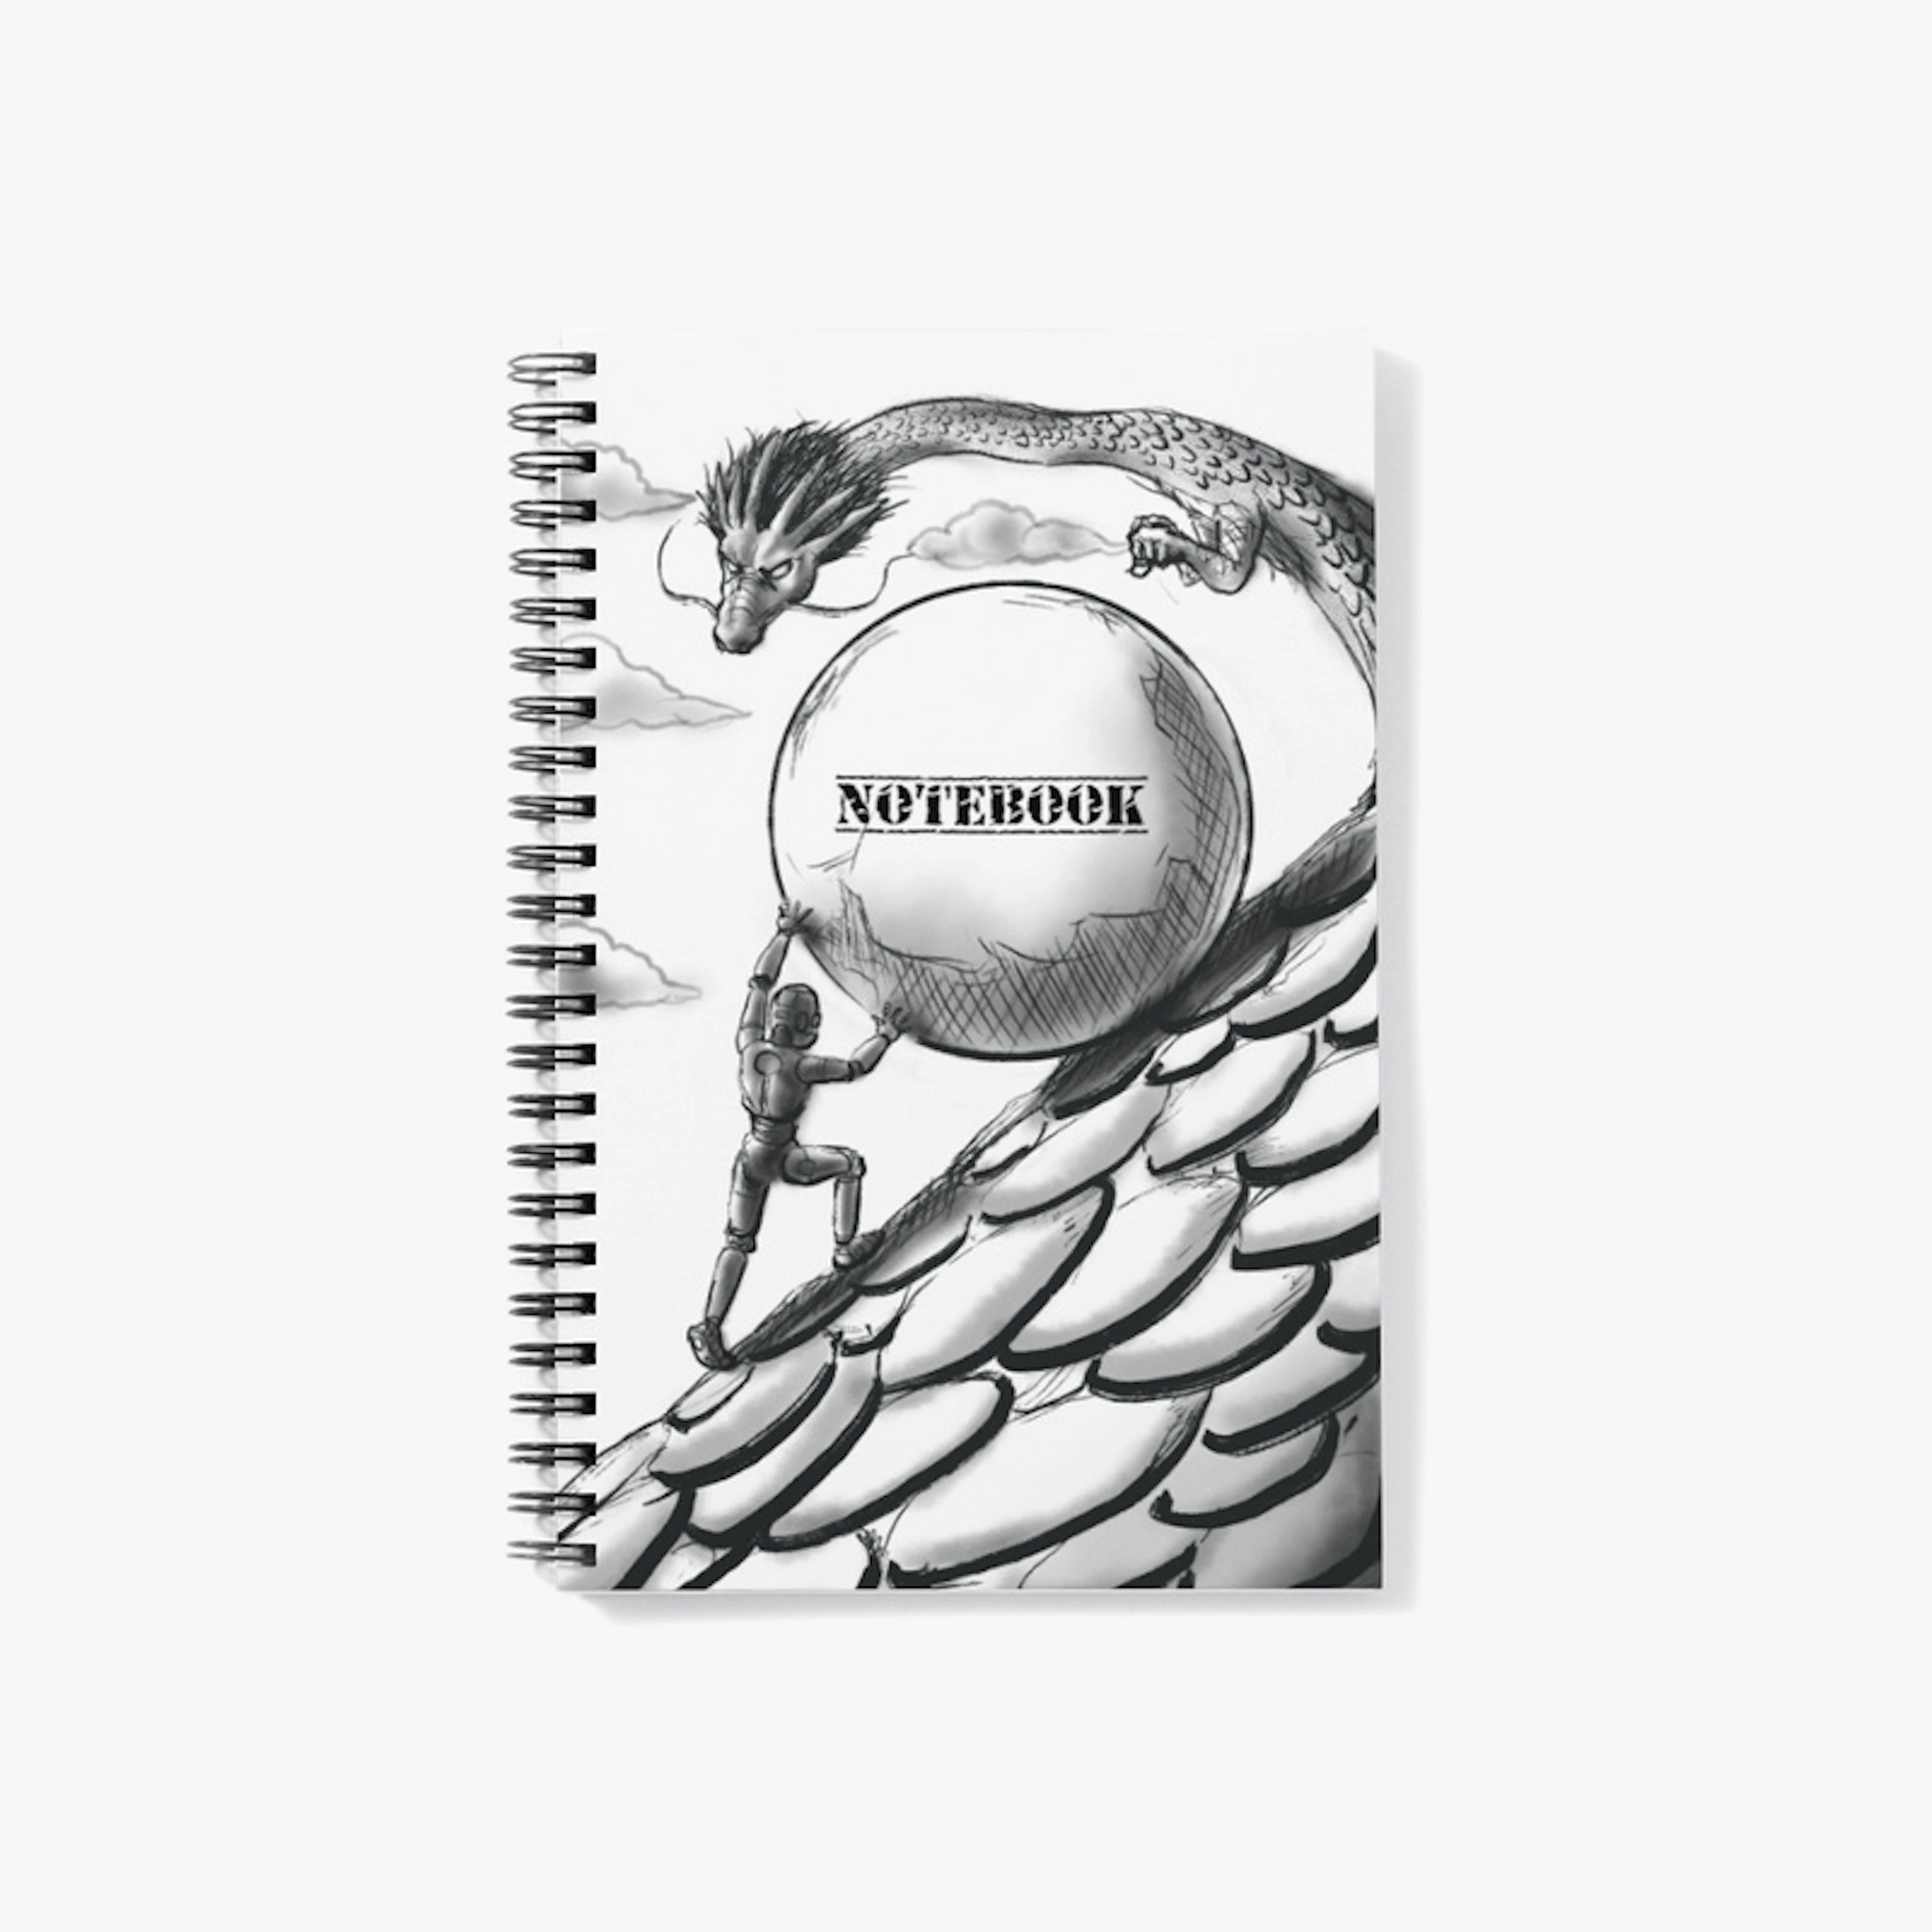 Notebook with some arts